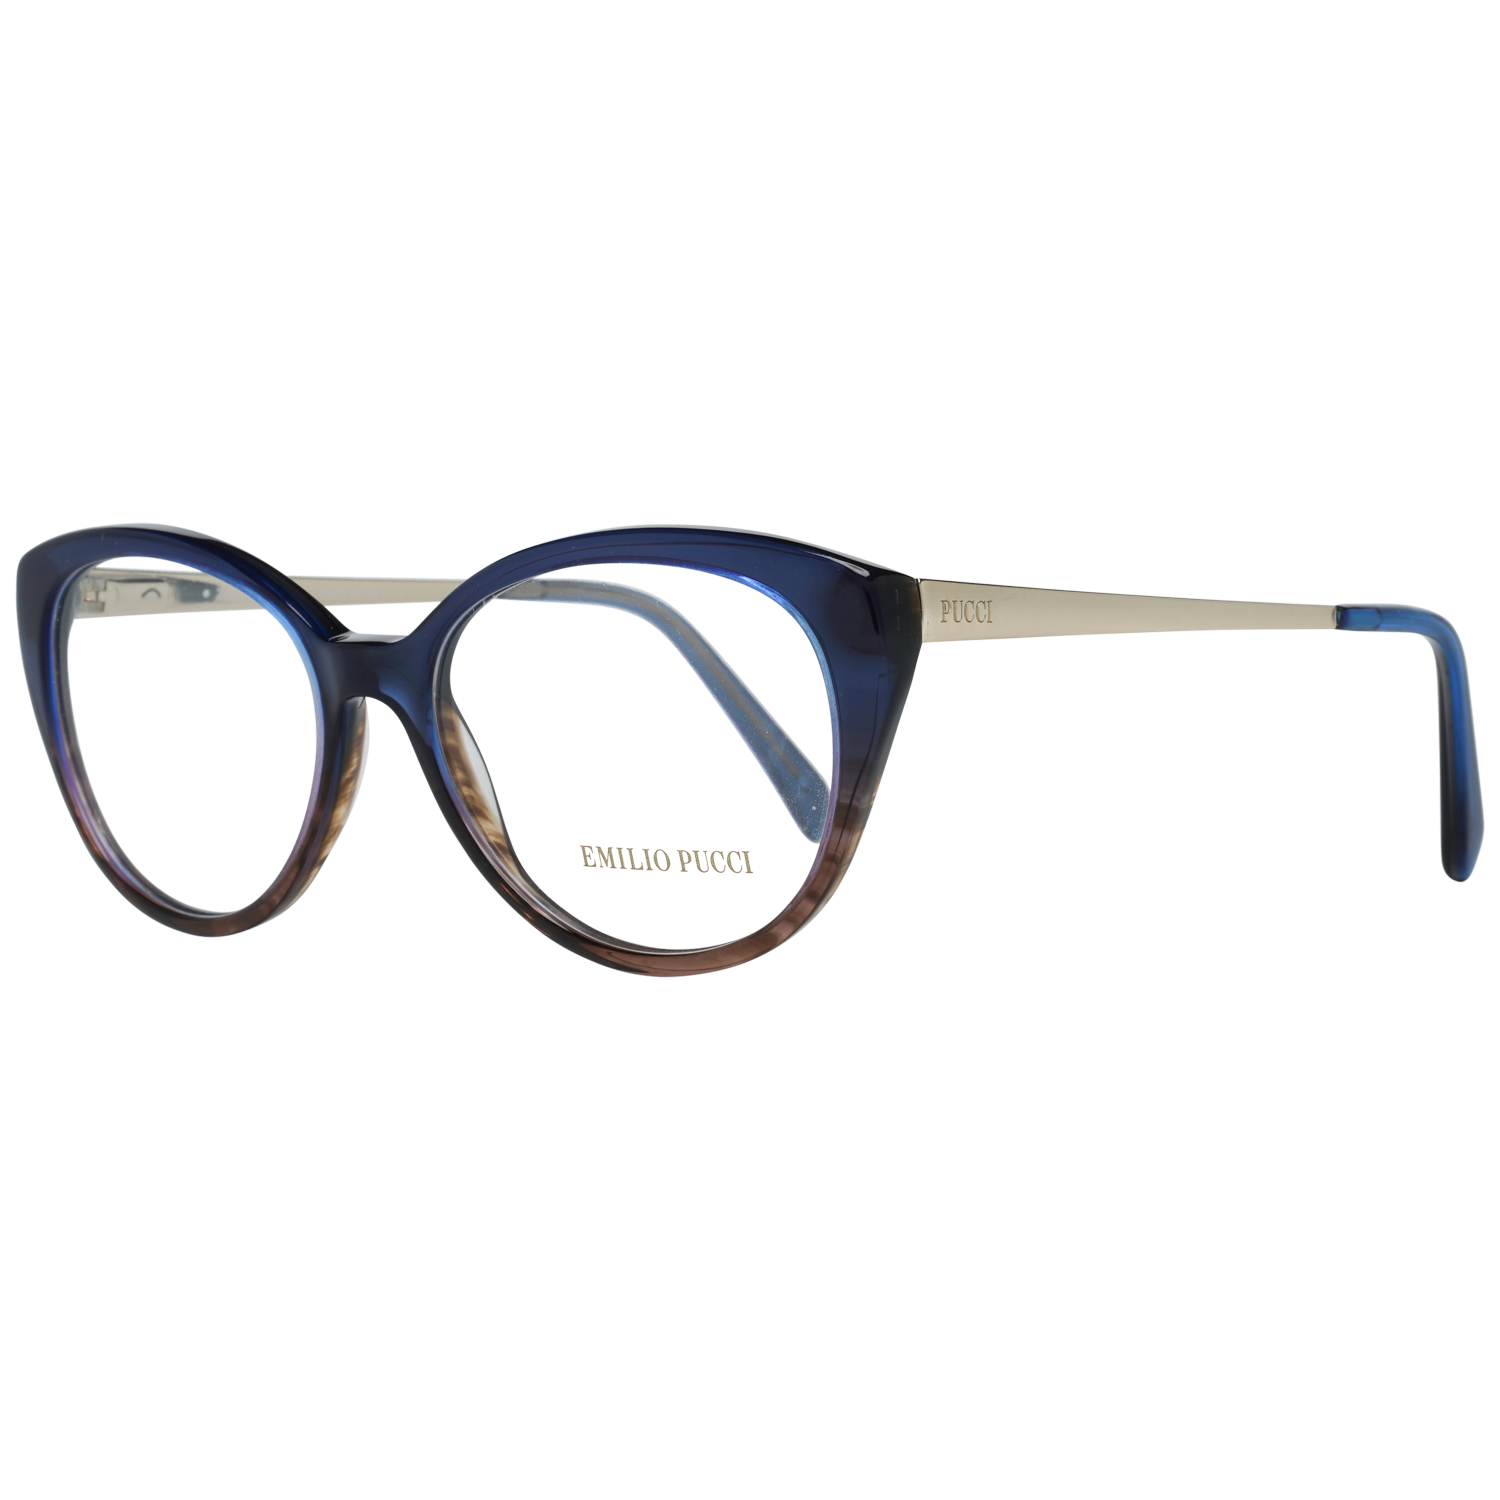 Emilio Pucci Optical Frame EP5063 092 53 Women
Frame color: Blue
Lenses width: 53
Lenses heigth: 41
Bridge length: 16
Frame width: 133
Temple length: 140
Shipment includes: Case, Cleaning cloth
Style: Full-Rim
Spring hinge: Yes